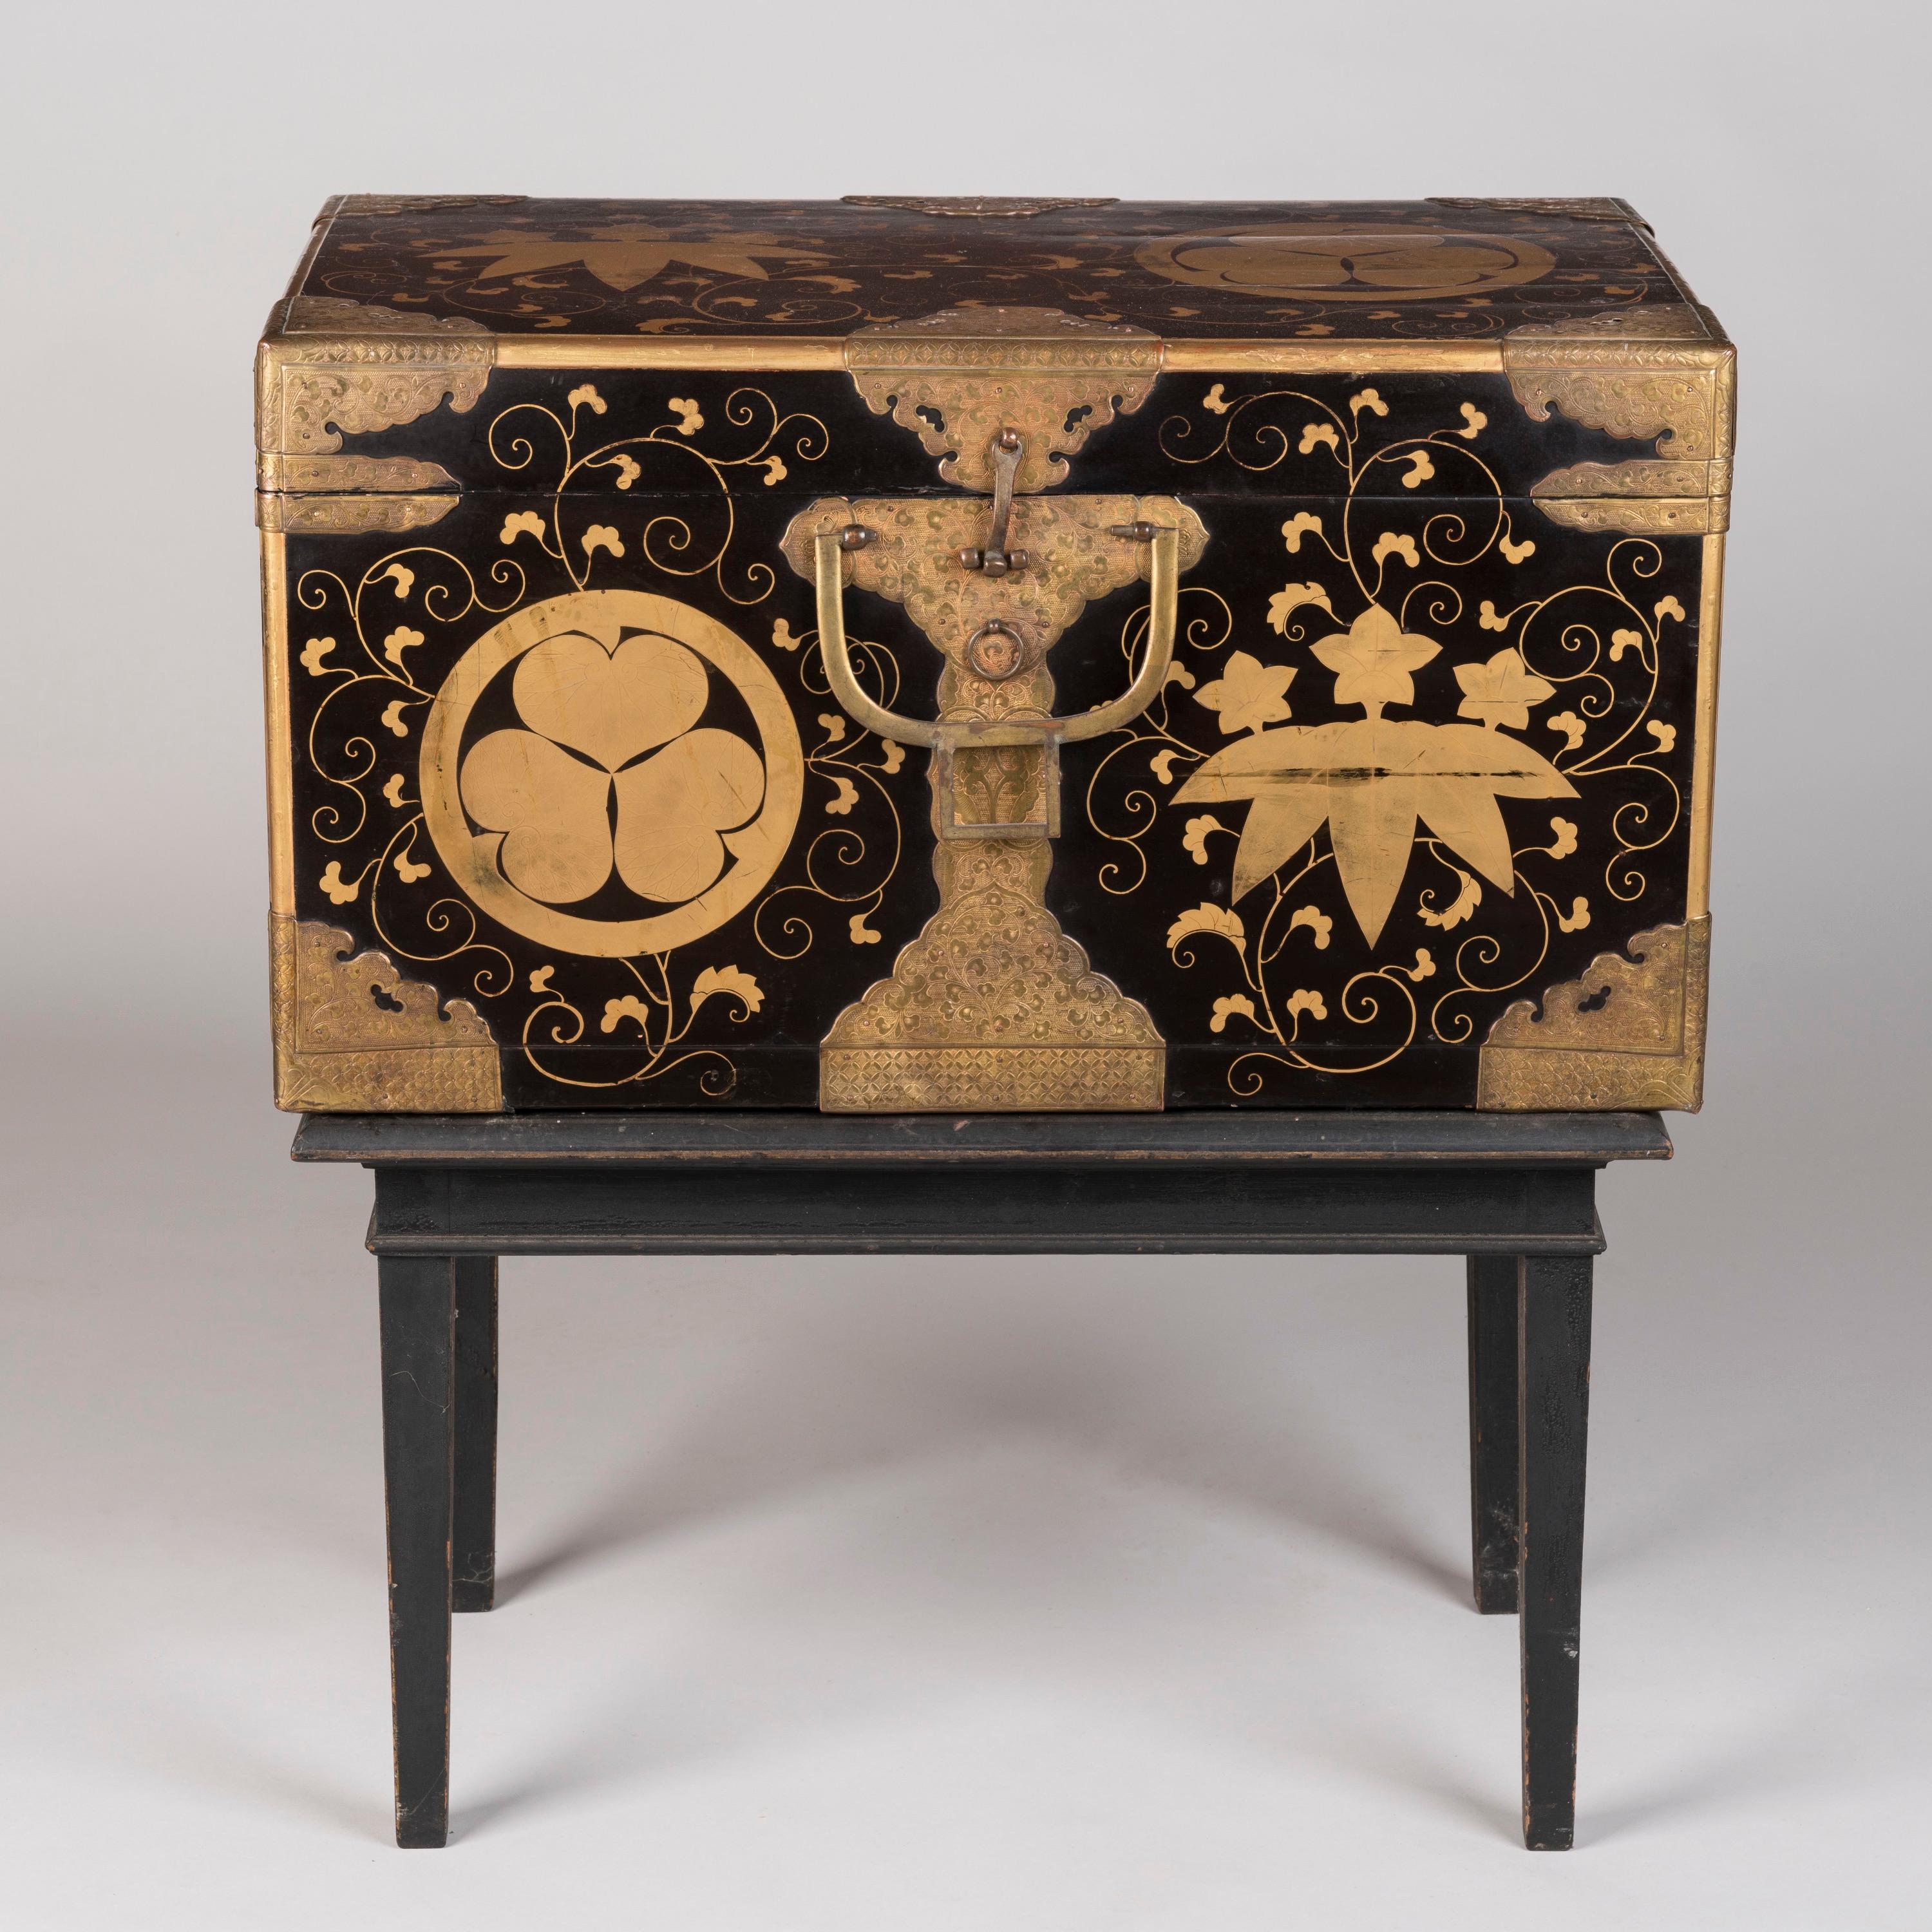 A Fine Black & Gold Lacquer 
Japanese Nagamochi Trunk

With Family Crests of the Tokugawa and Minamoto Clans

Of rectangular form, the storage trunk covered on all sides with hiramaki-e Japanese lacquer work in low relief and embellished with gilded